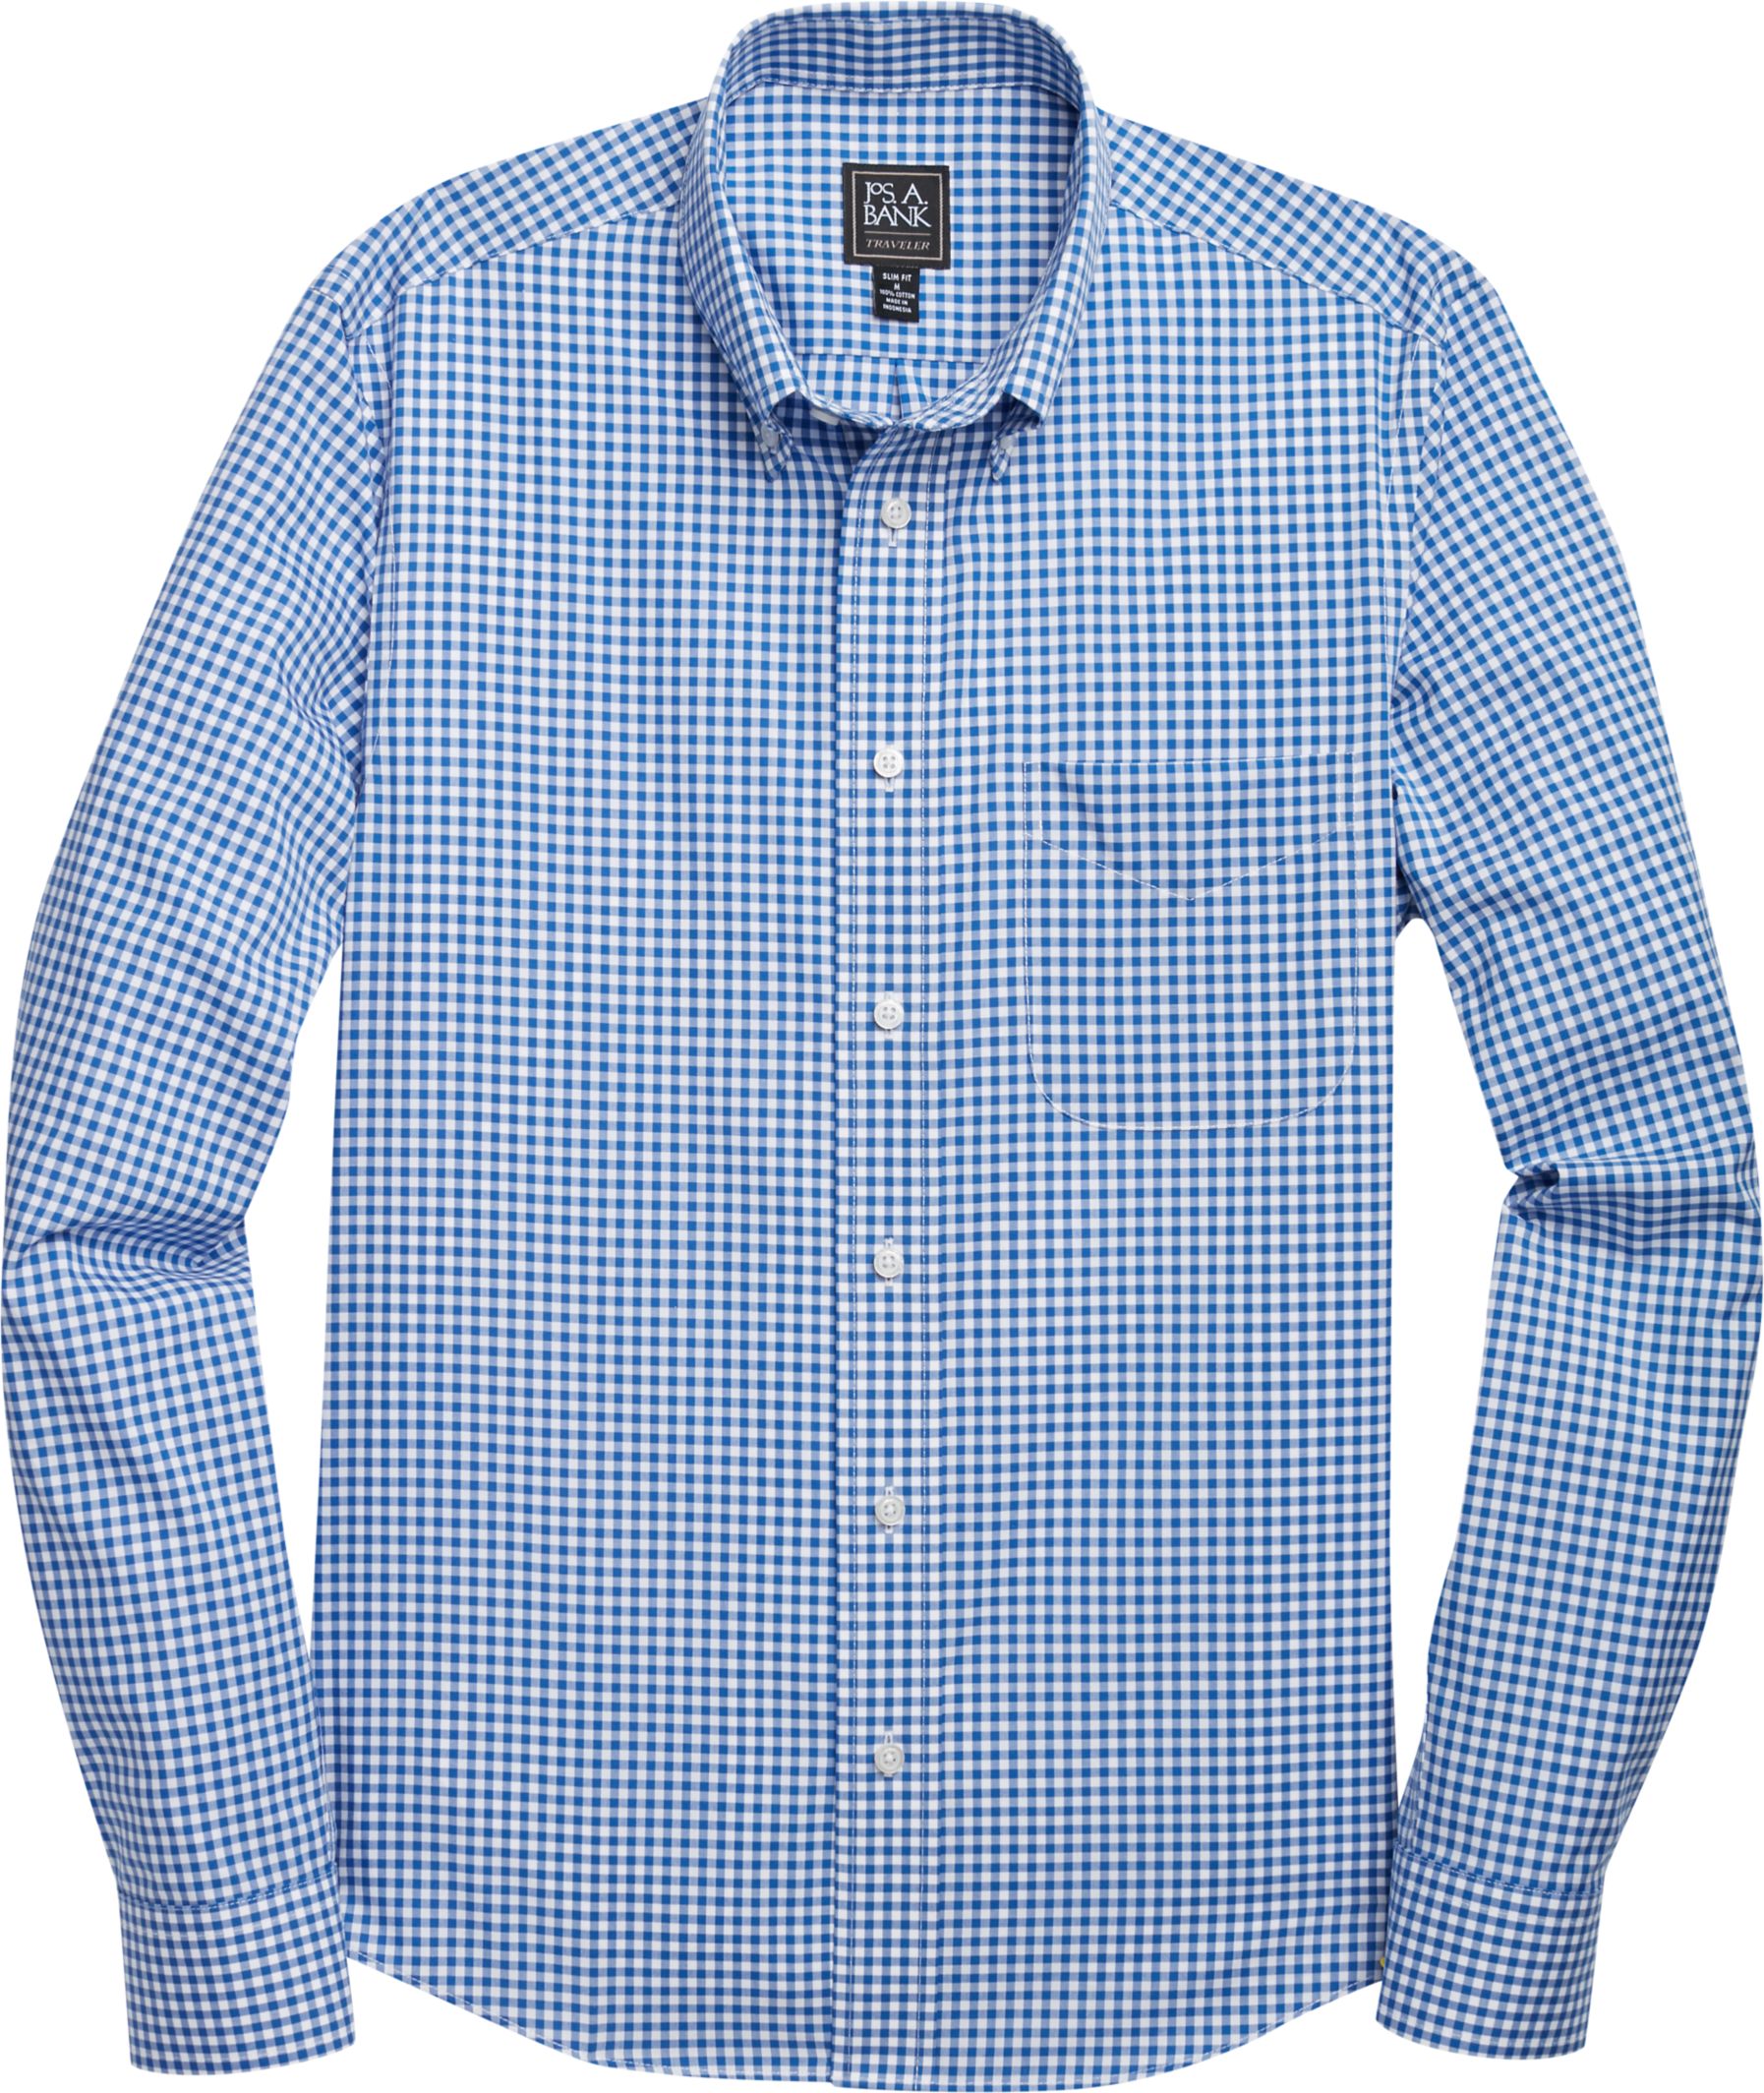 Traveler Collection Slim Fit Long Sleeve Button-Down Collar Gingham ...